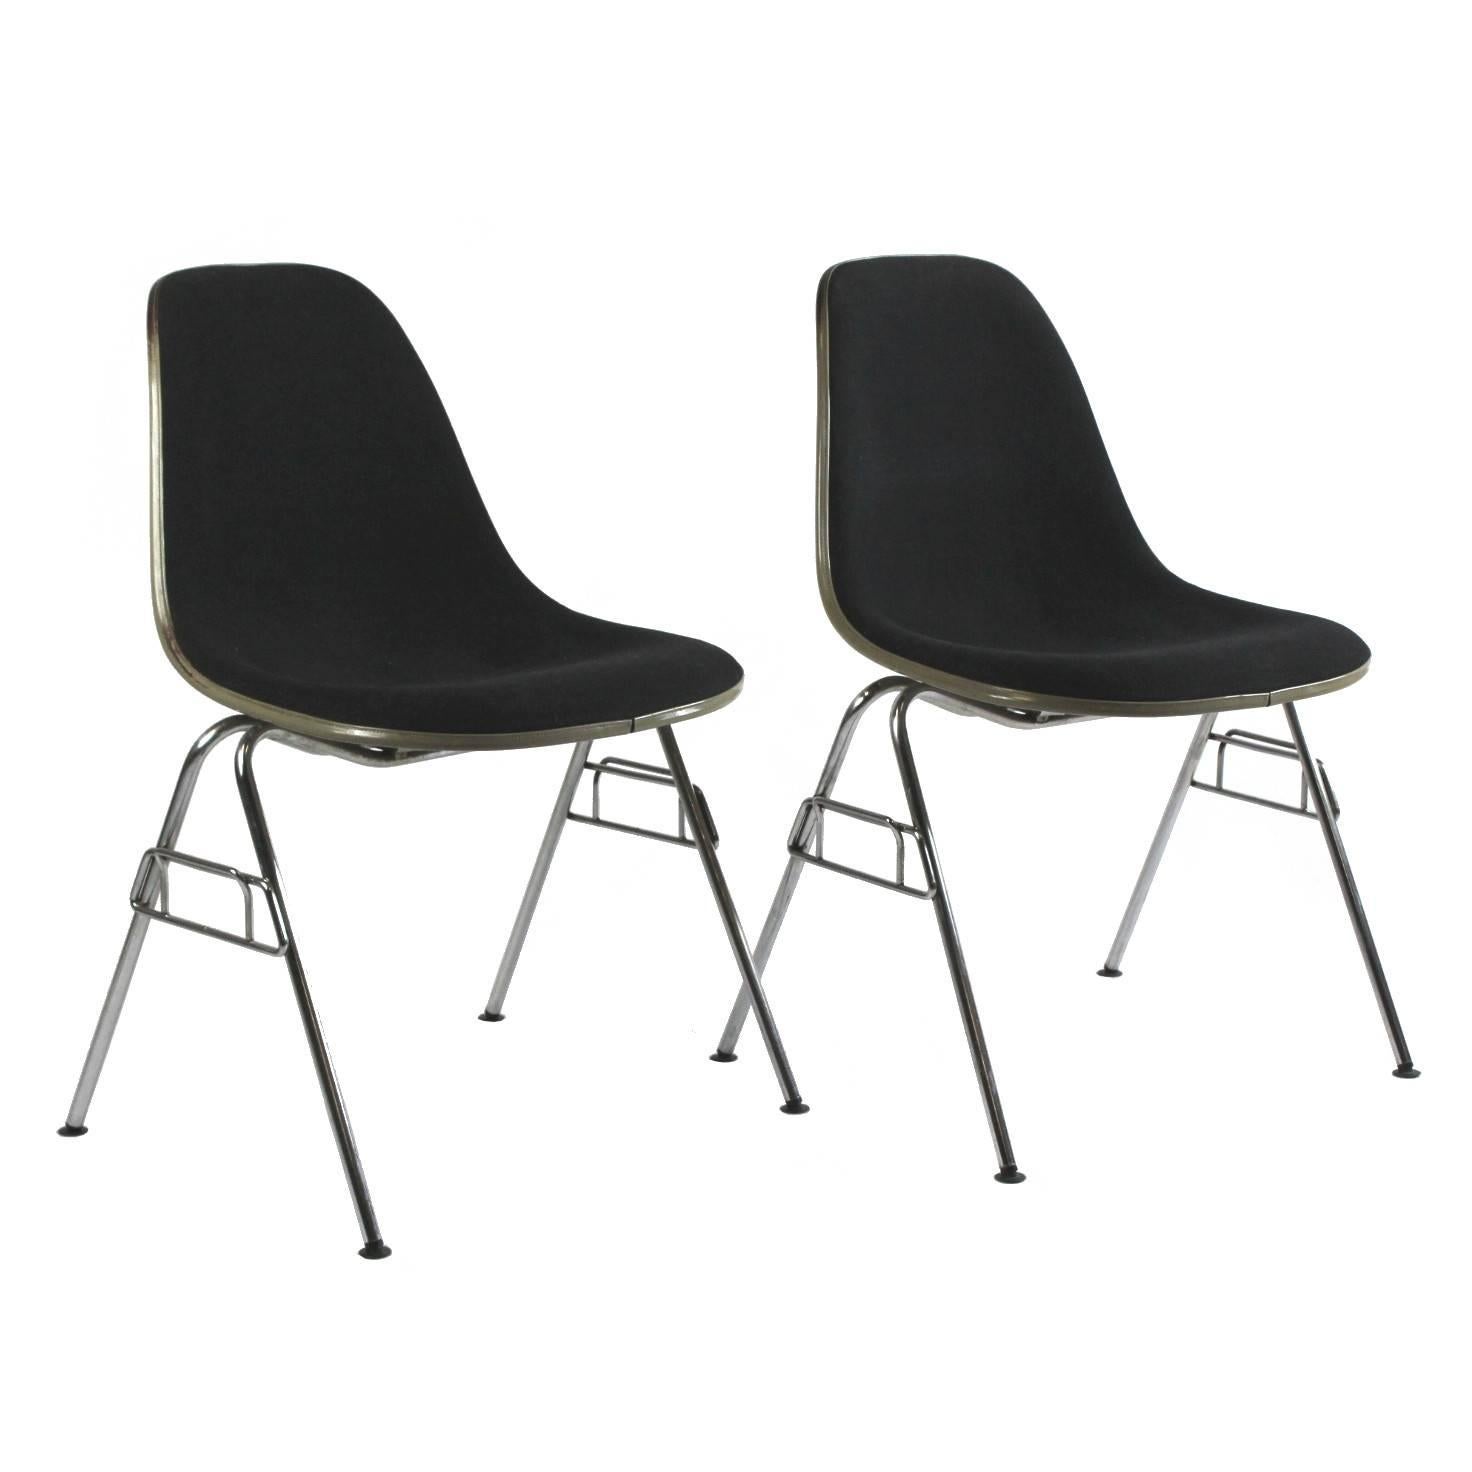 Stacking chairs designed by Ray and Charles Eames in 1955 and manufactured by Herman Miller in the U.S. fiberglass seat shells, dark blue upholstery. Both of the chairs are labeled Herman Miller under the seat.